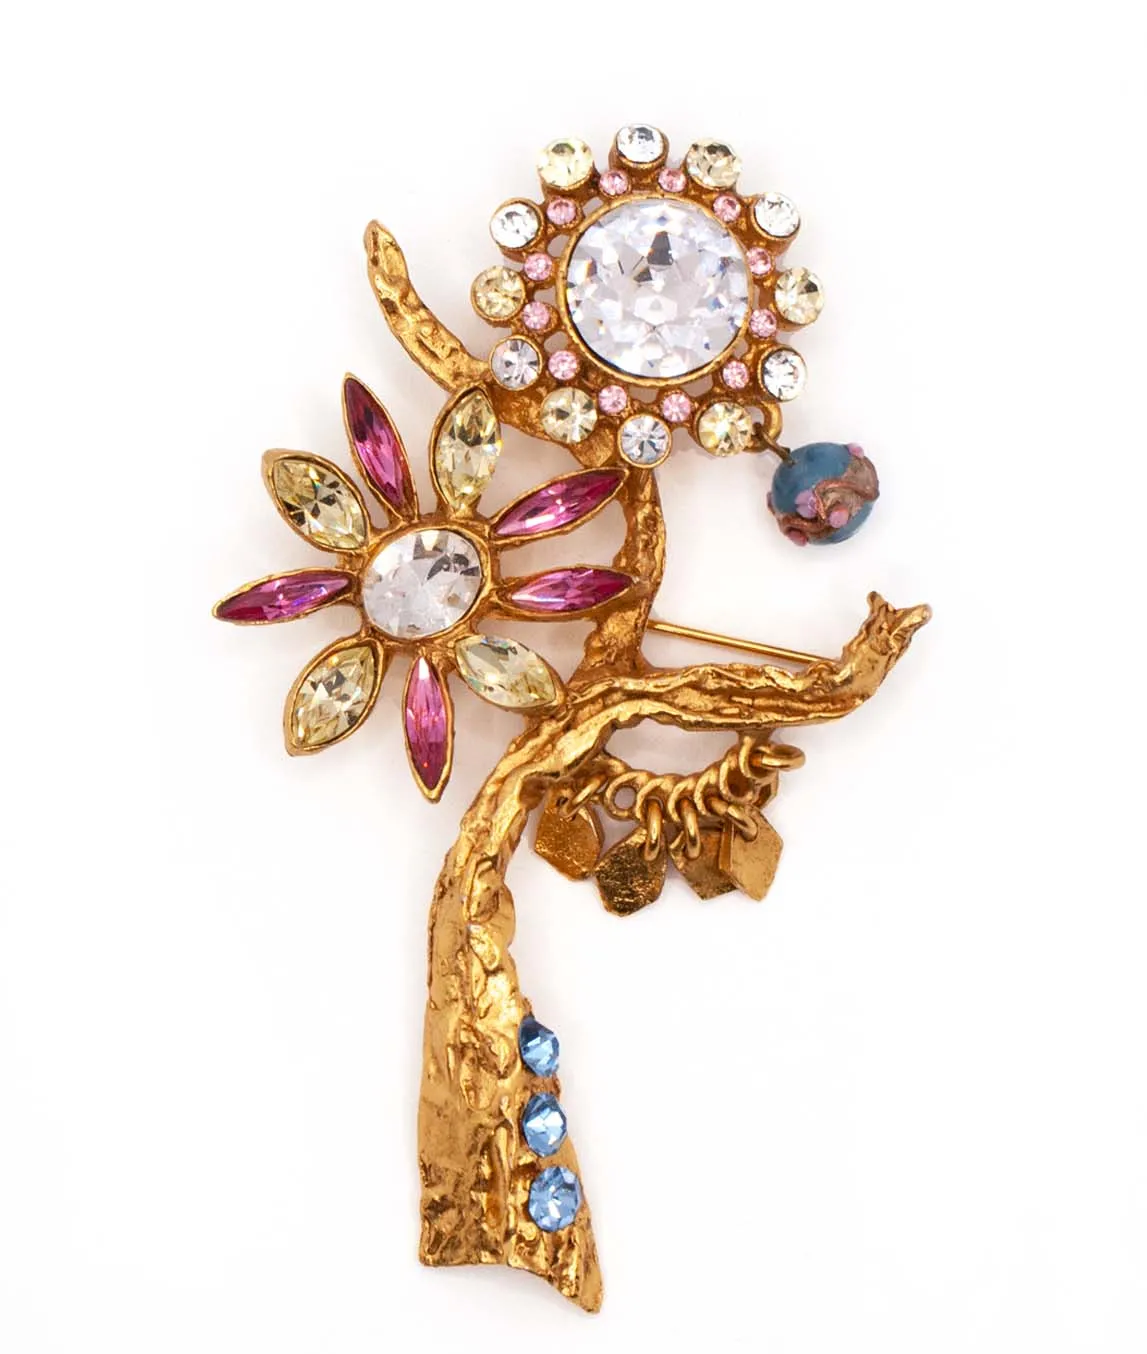 Large vintage Christian Lacroix flower brooch in matte gold plated metal with Pink Green Blue rhinestones